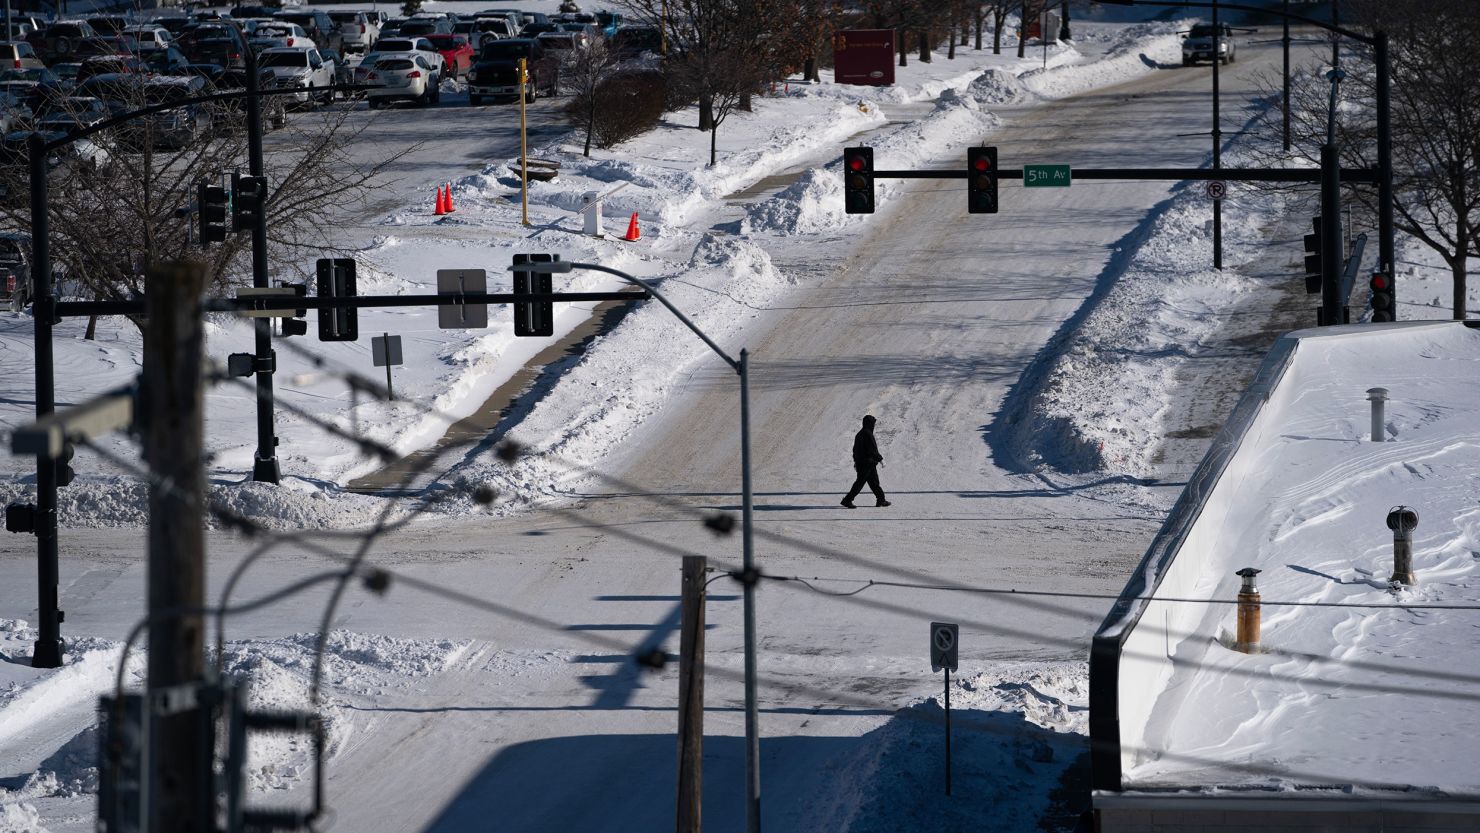 A pedestrian crosses a snow-covered street during a winter storm ahead of the Iowa caucus in Des Moines, Iowa, US, on Sunday, Jan. 14, 2024. Iowans on Monday will cast the first votes in the 2024 presidential nominating process during a caucus that's likely to show depressed turnout because of historically frigid weather. Photographer: Nathan Howard/Bloomberg via Getty Images